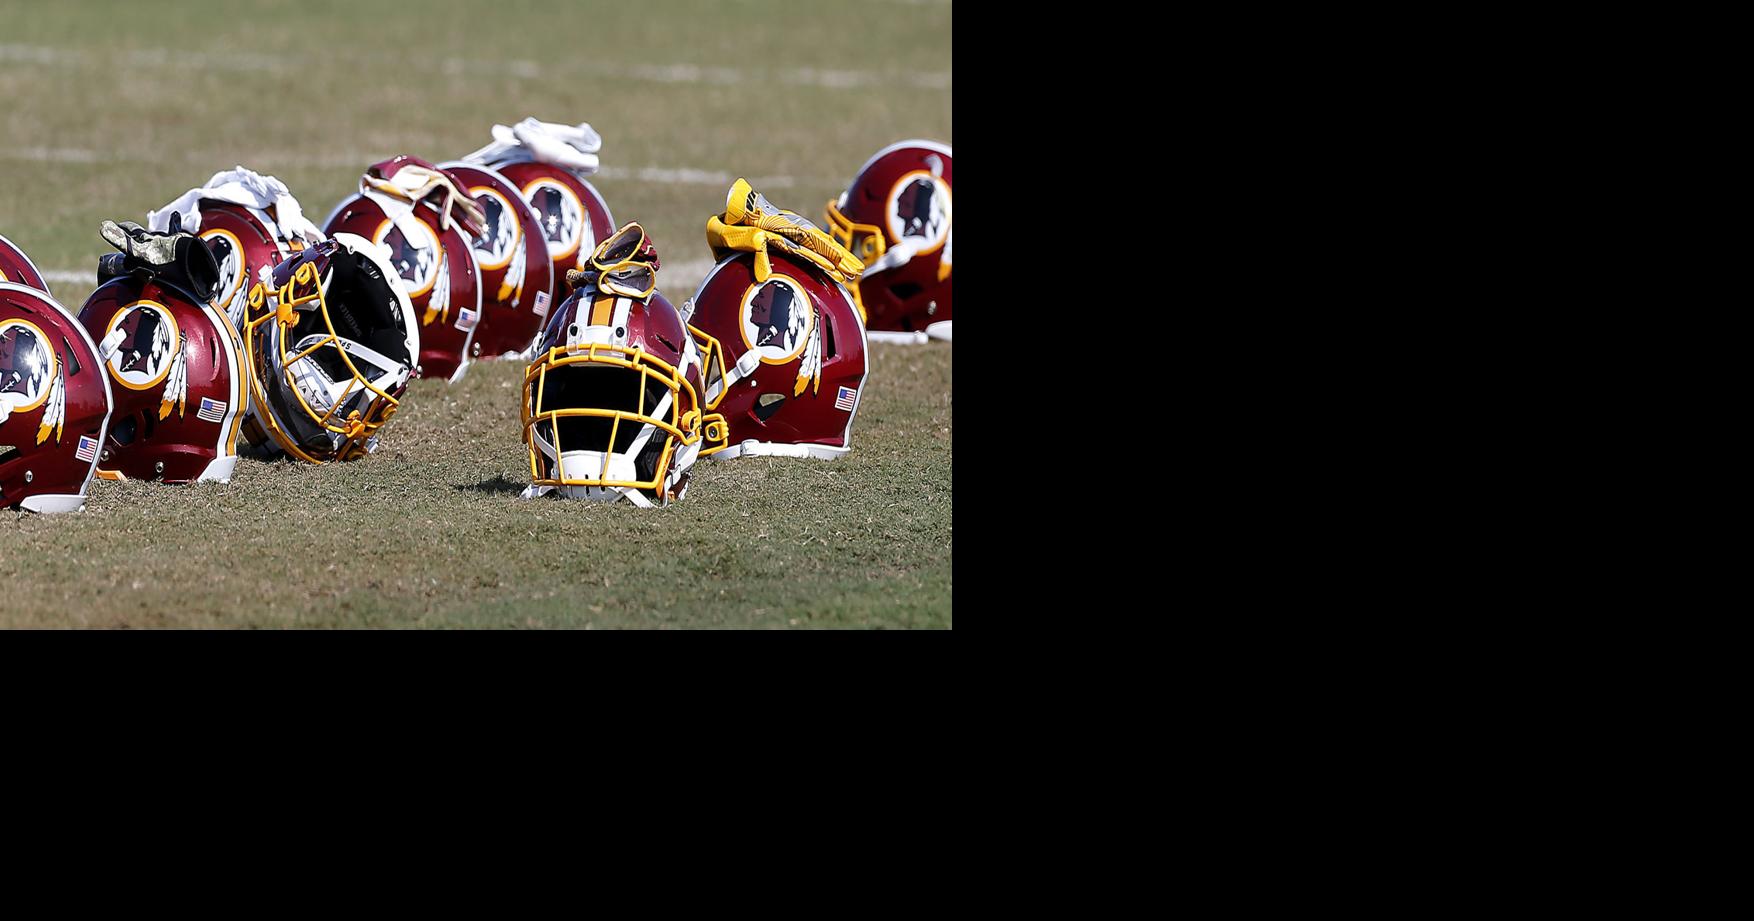 FedEx calls for the Redskins to change their name; Nike pulls team